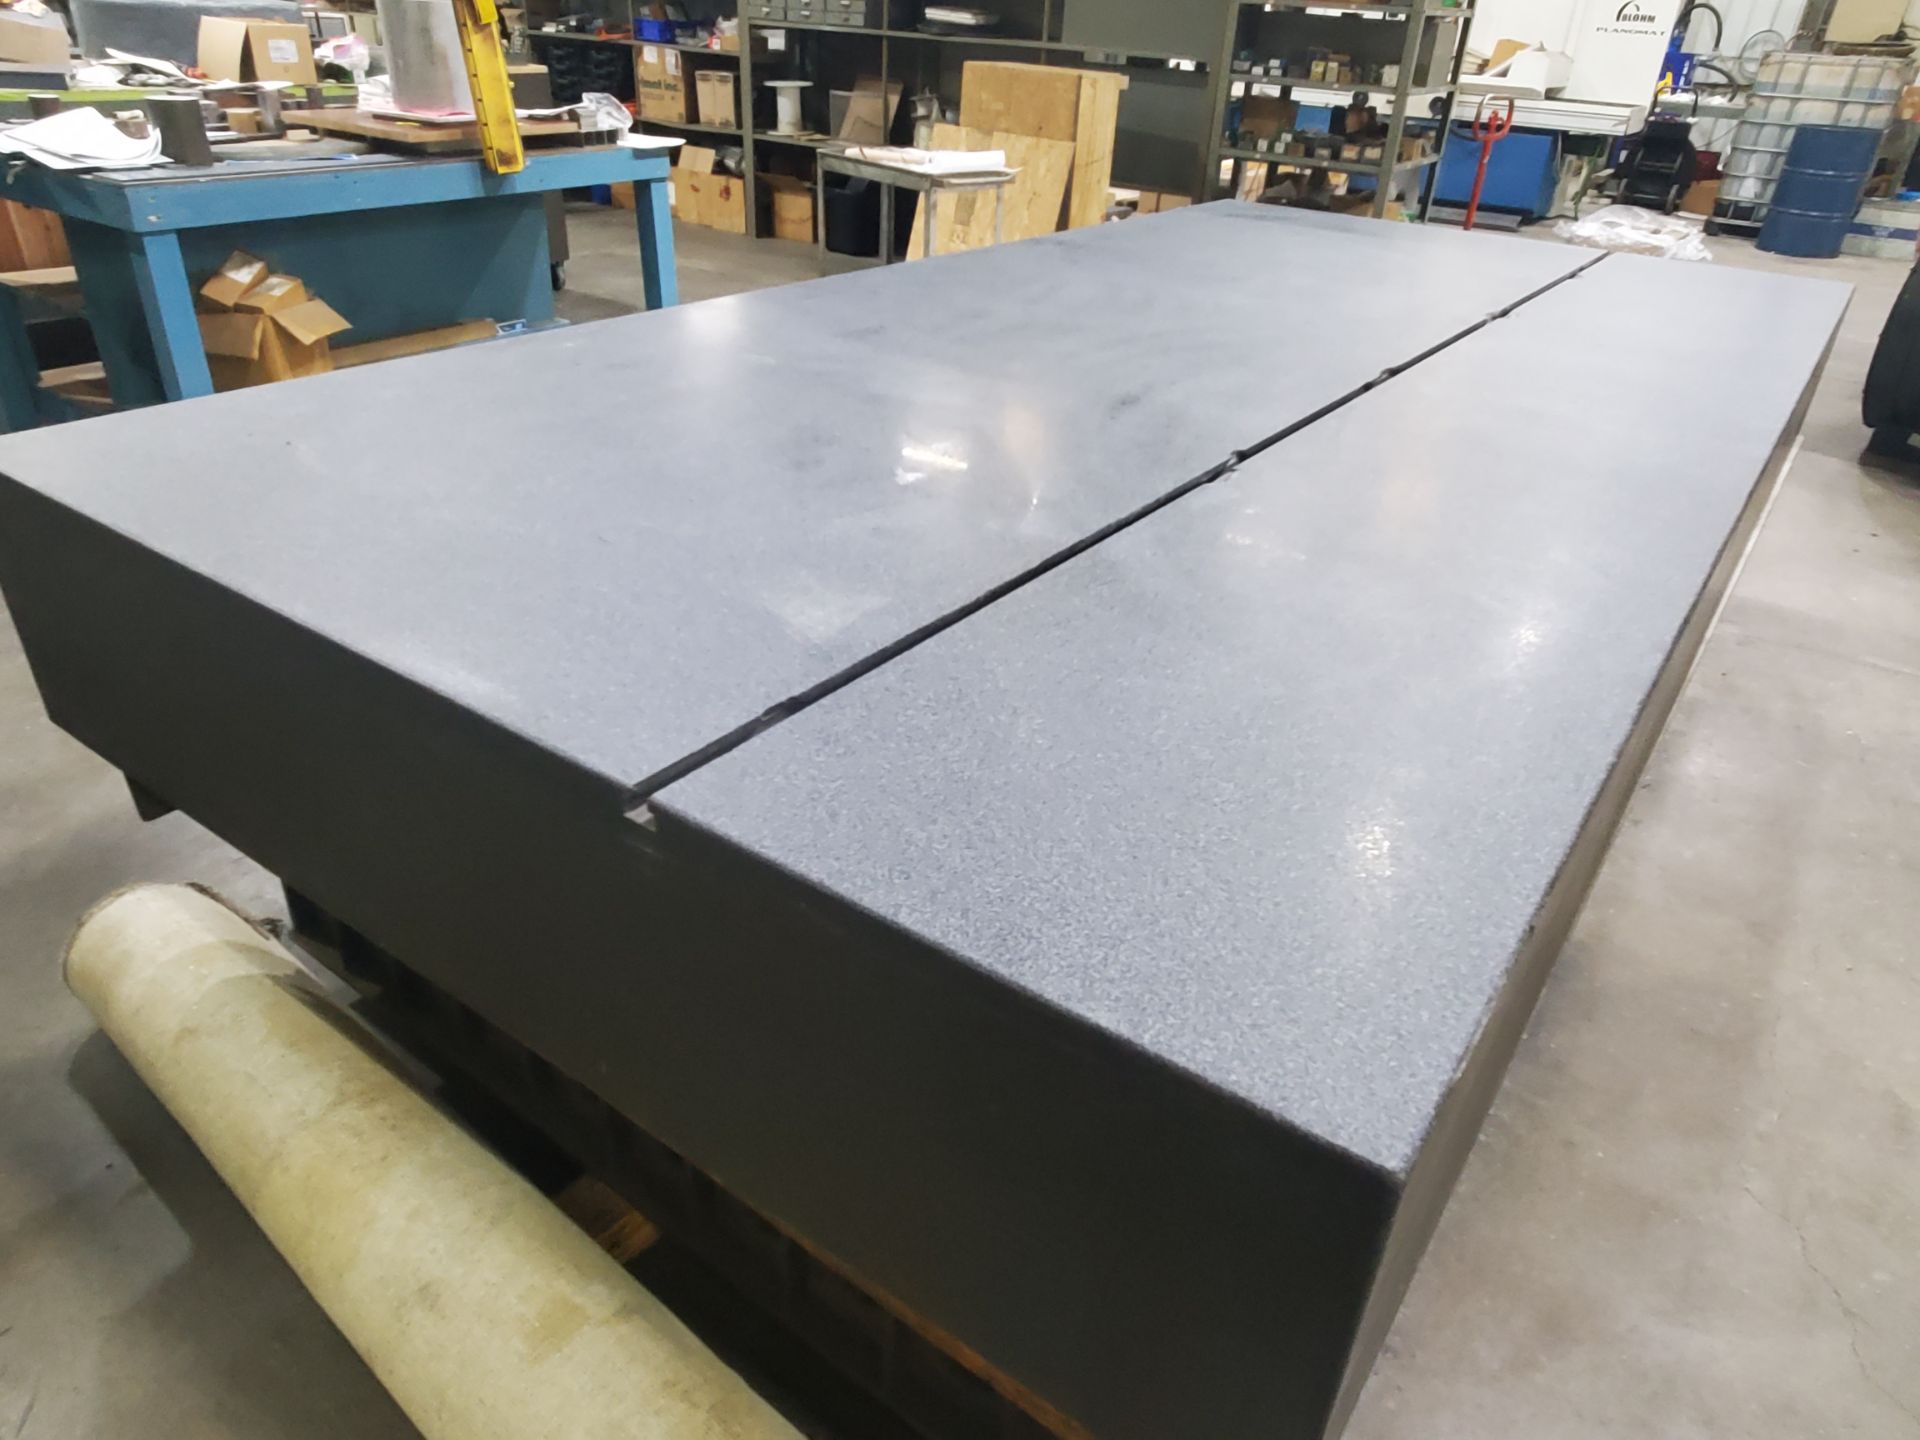 Granite Surface Plate 144" x 72" x 15.5" - Image 3 of 11